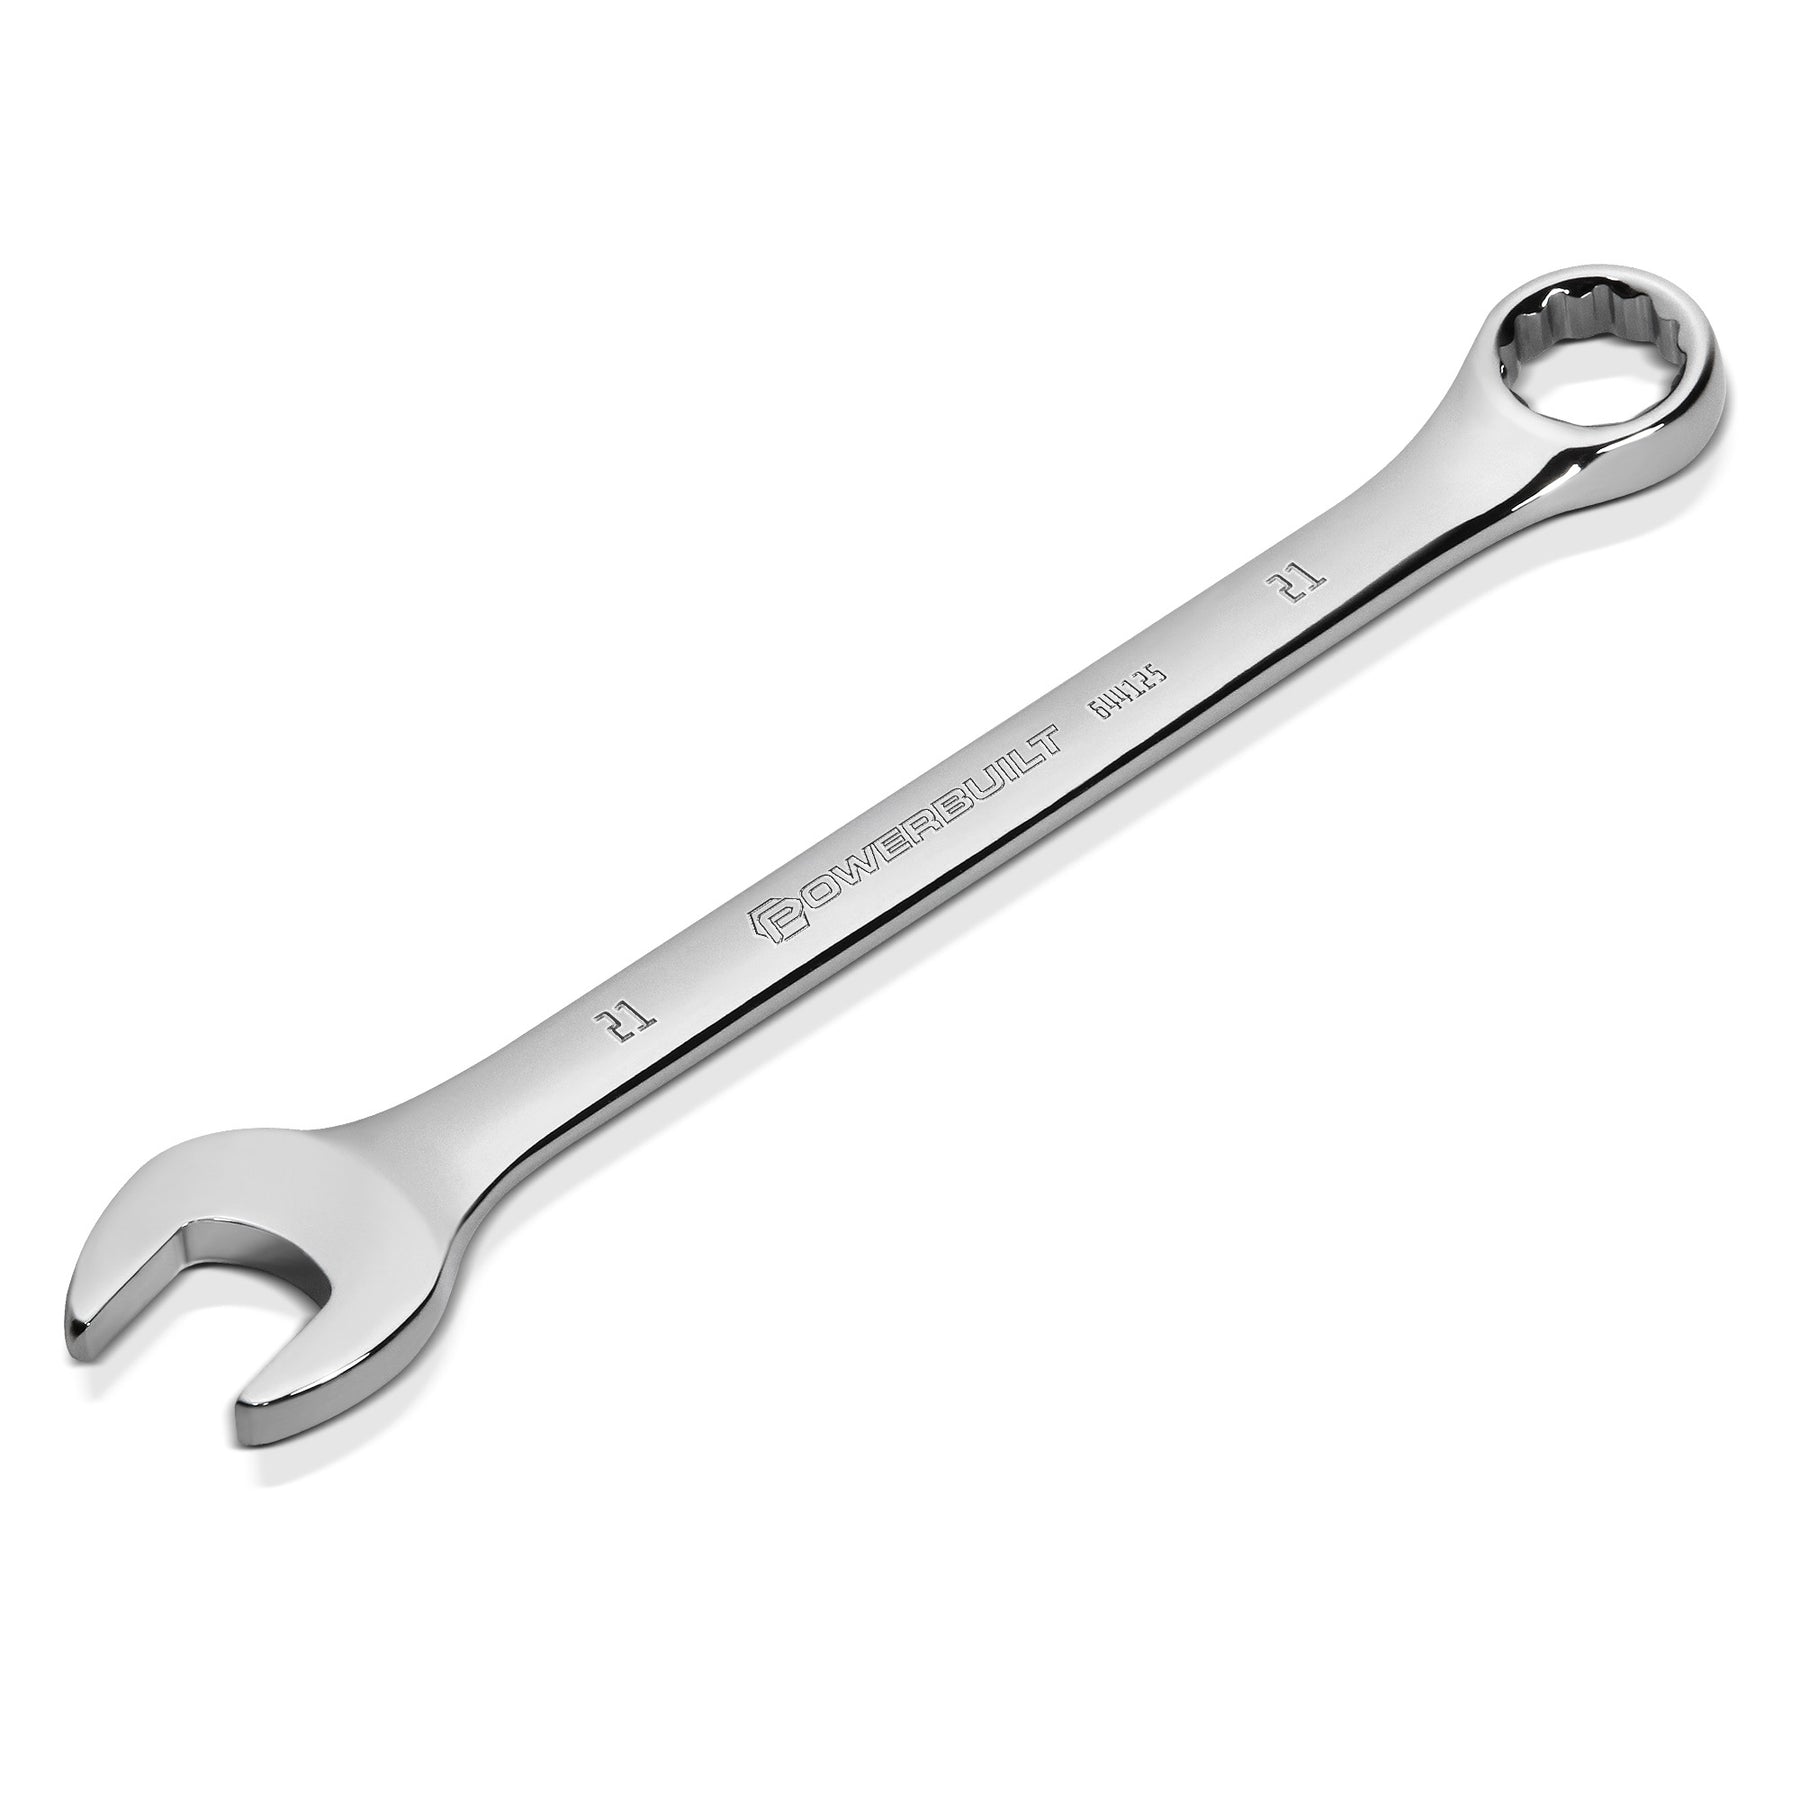 21 MM Fully Polished Metric Combination Wrench